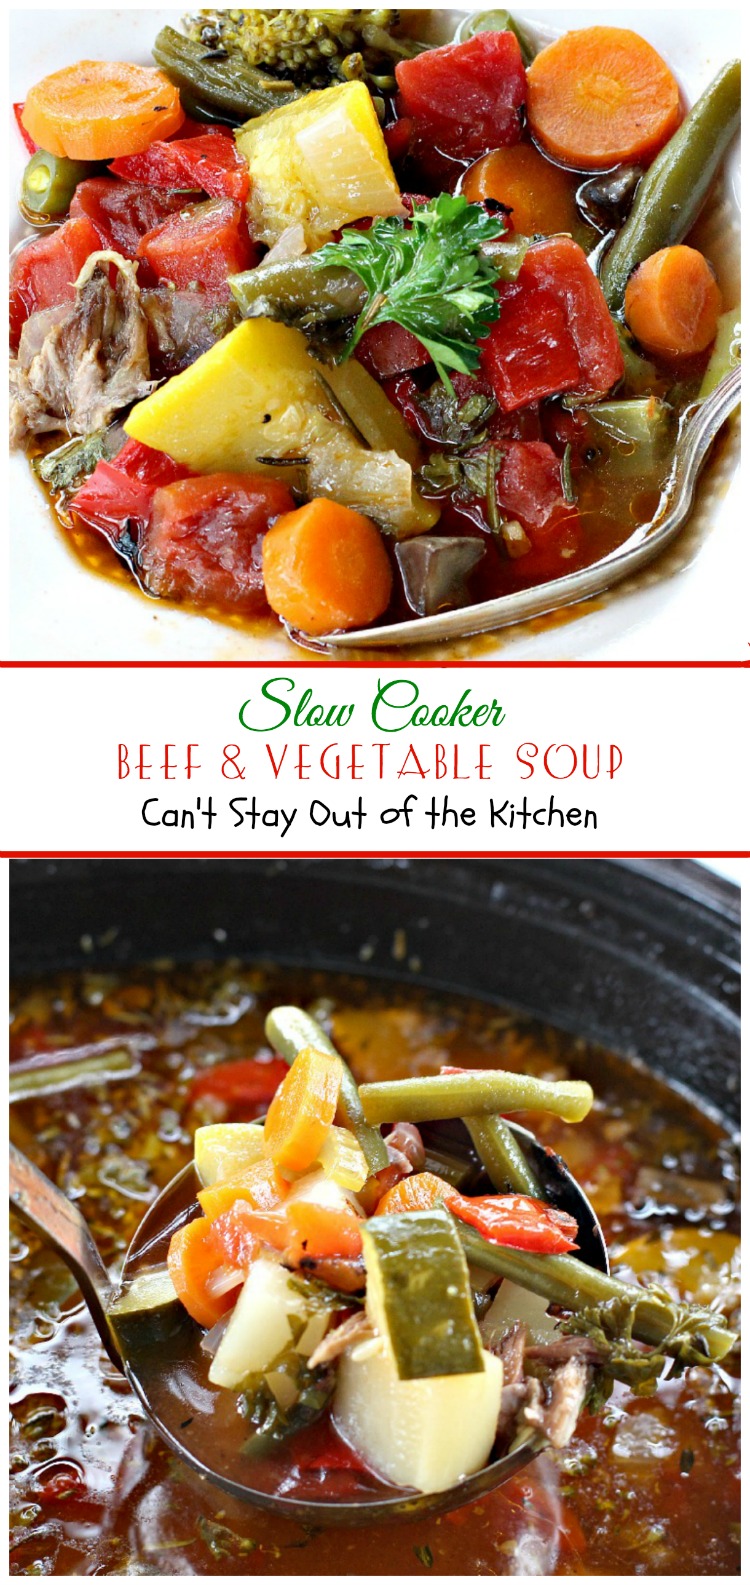 Slow Cooker Beef and Sweet Potato Stew – Can't Stay Out of the Kitchen